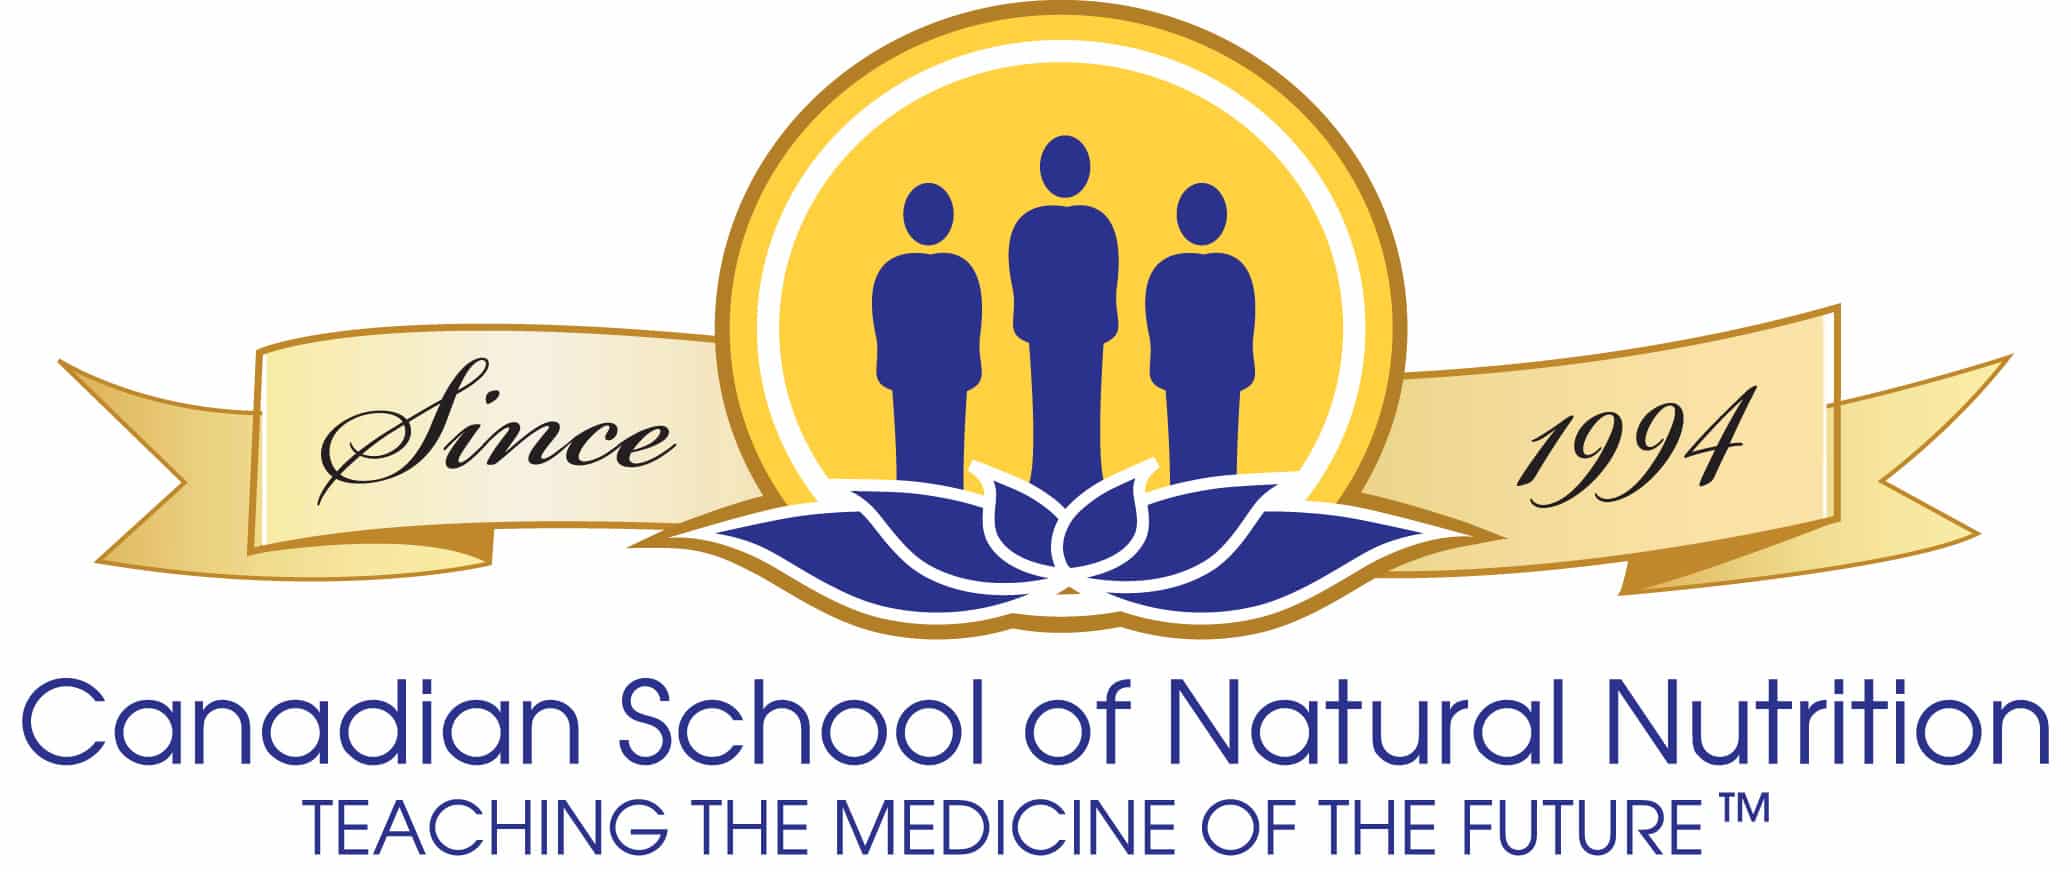 Canadian School of Natural Nutrition